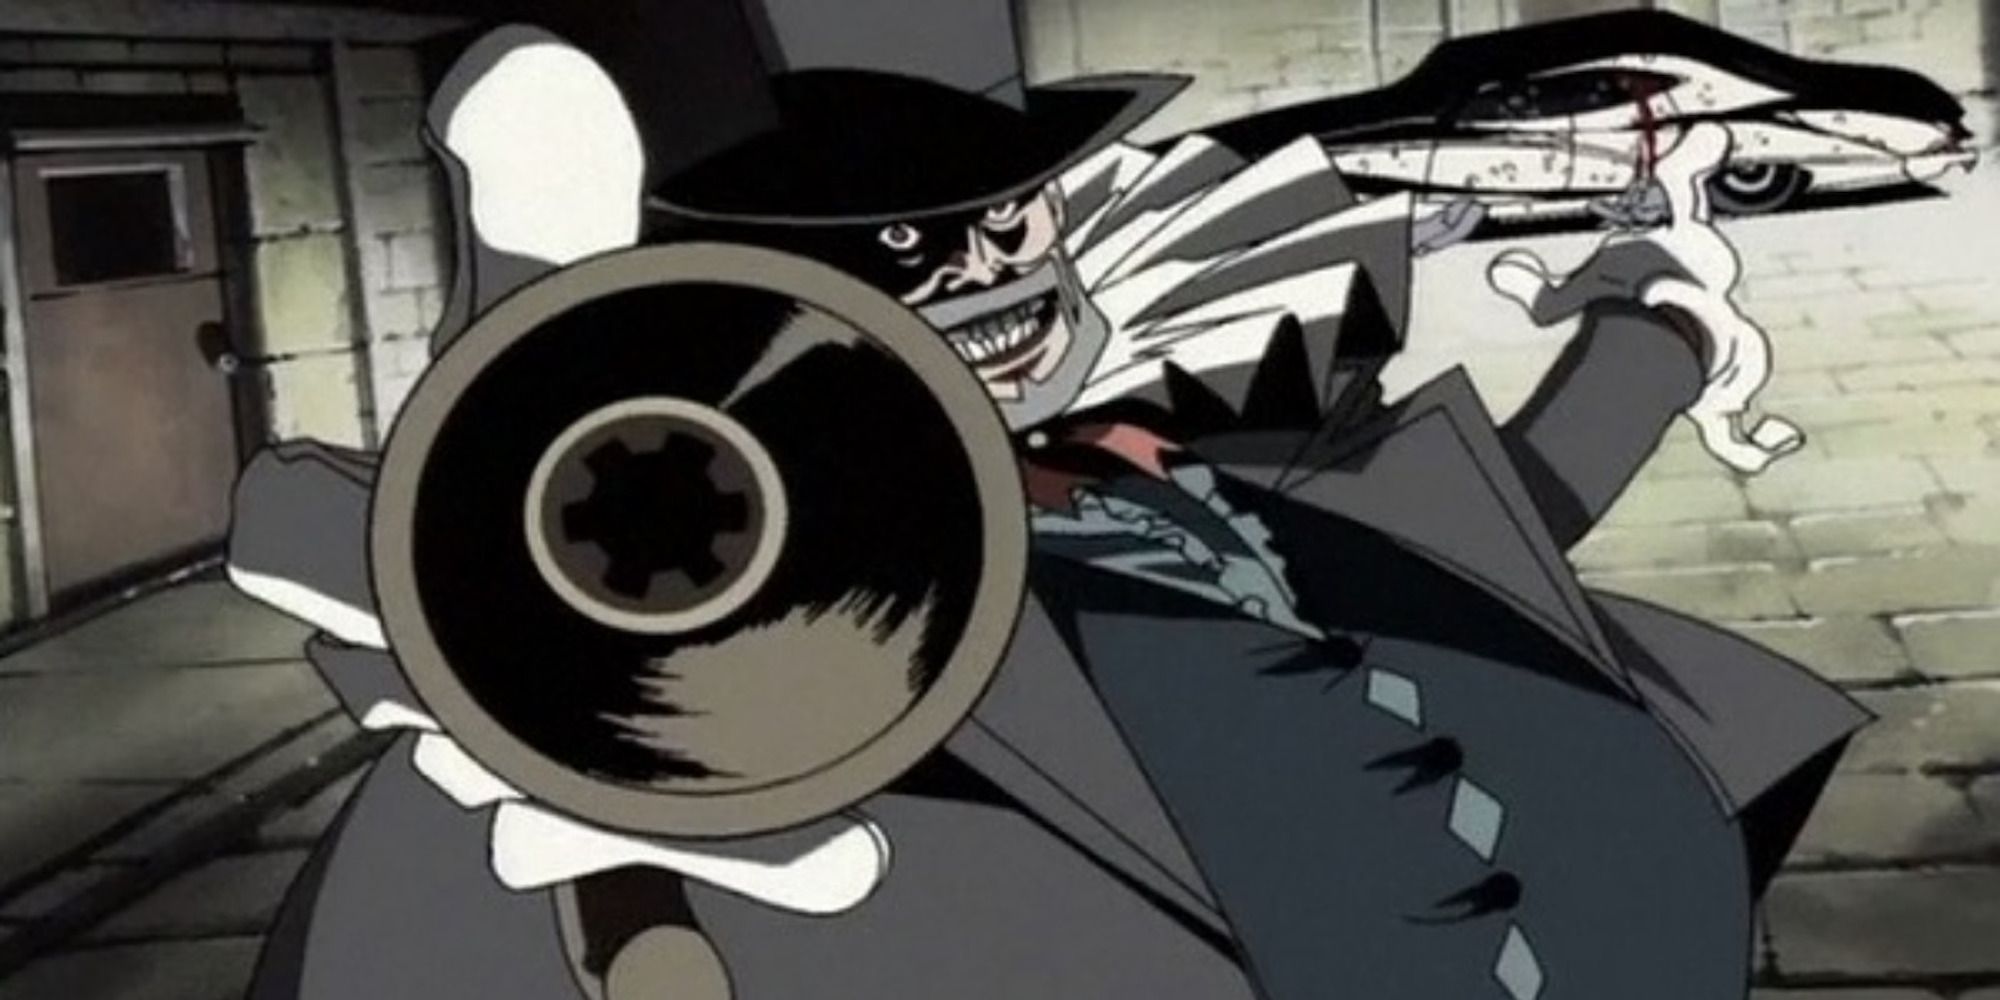 Mad Pierrot from Cowboy Bebop